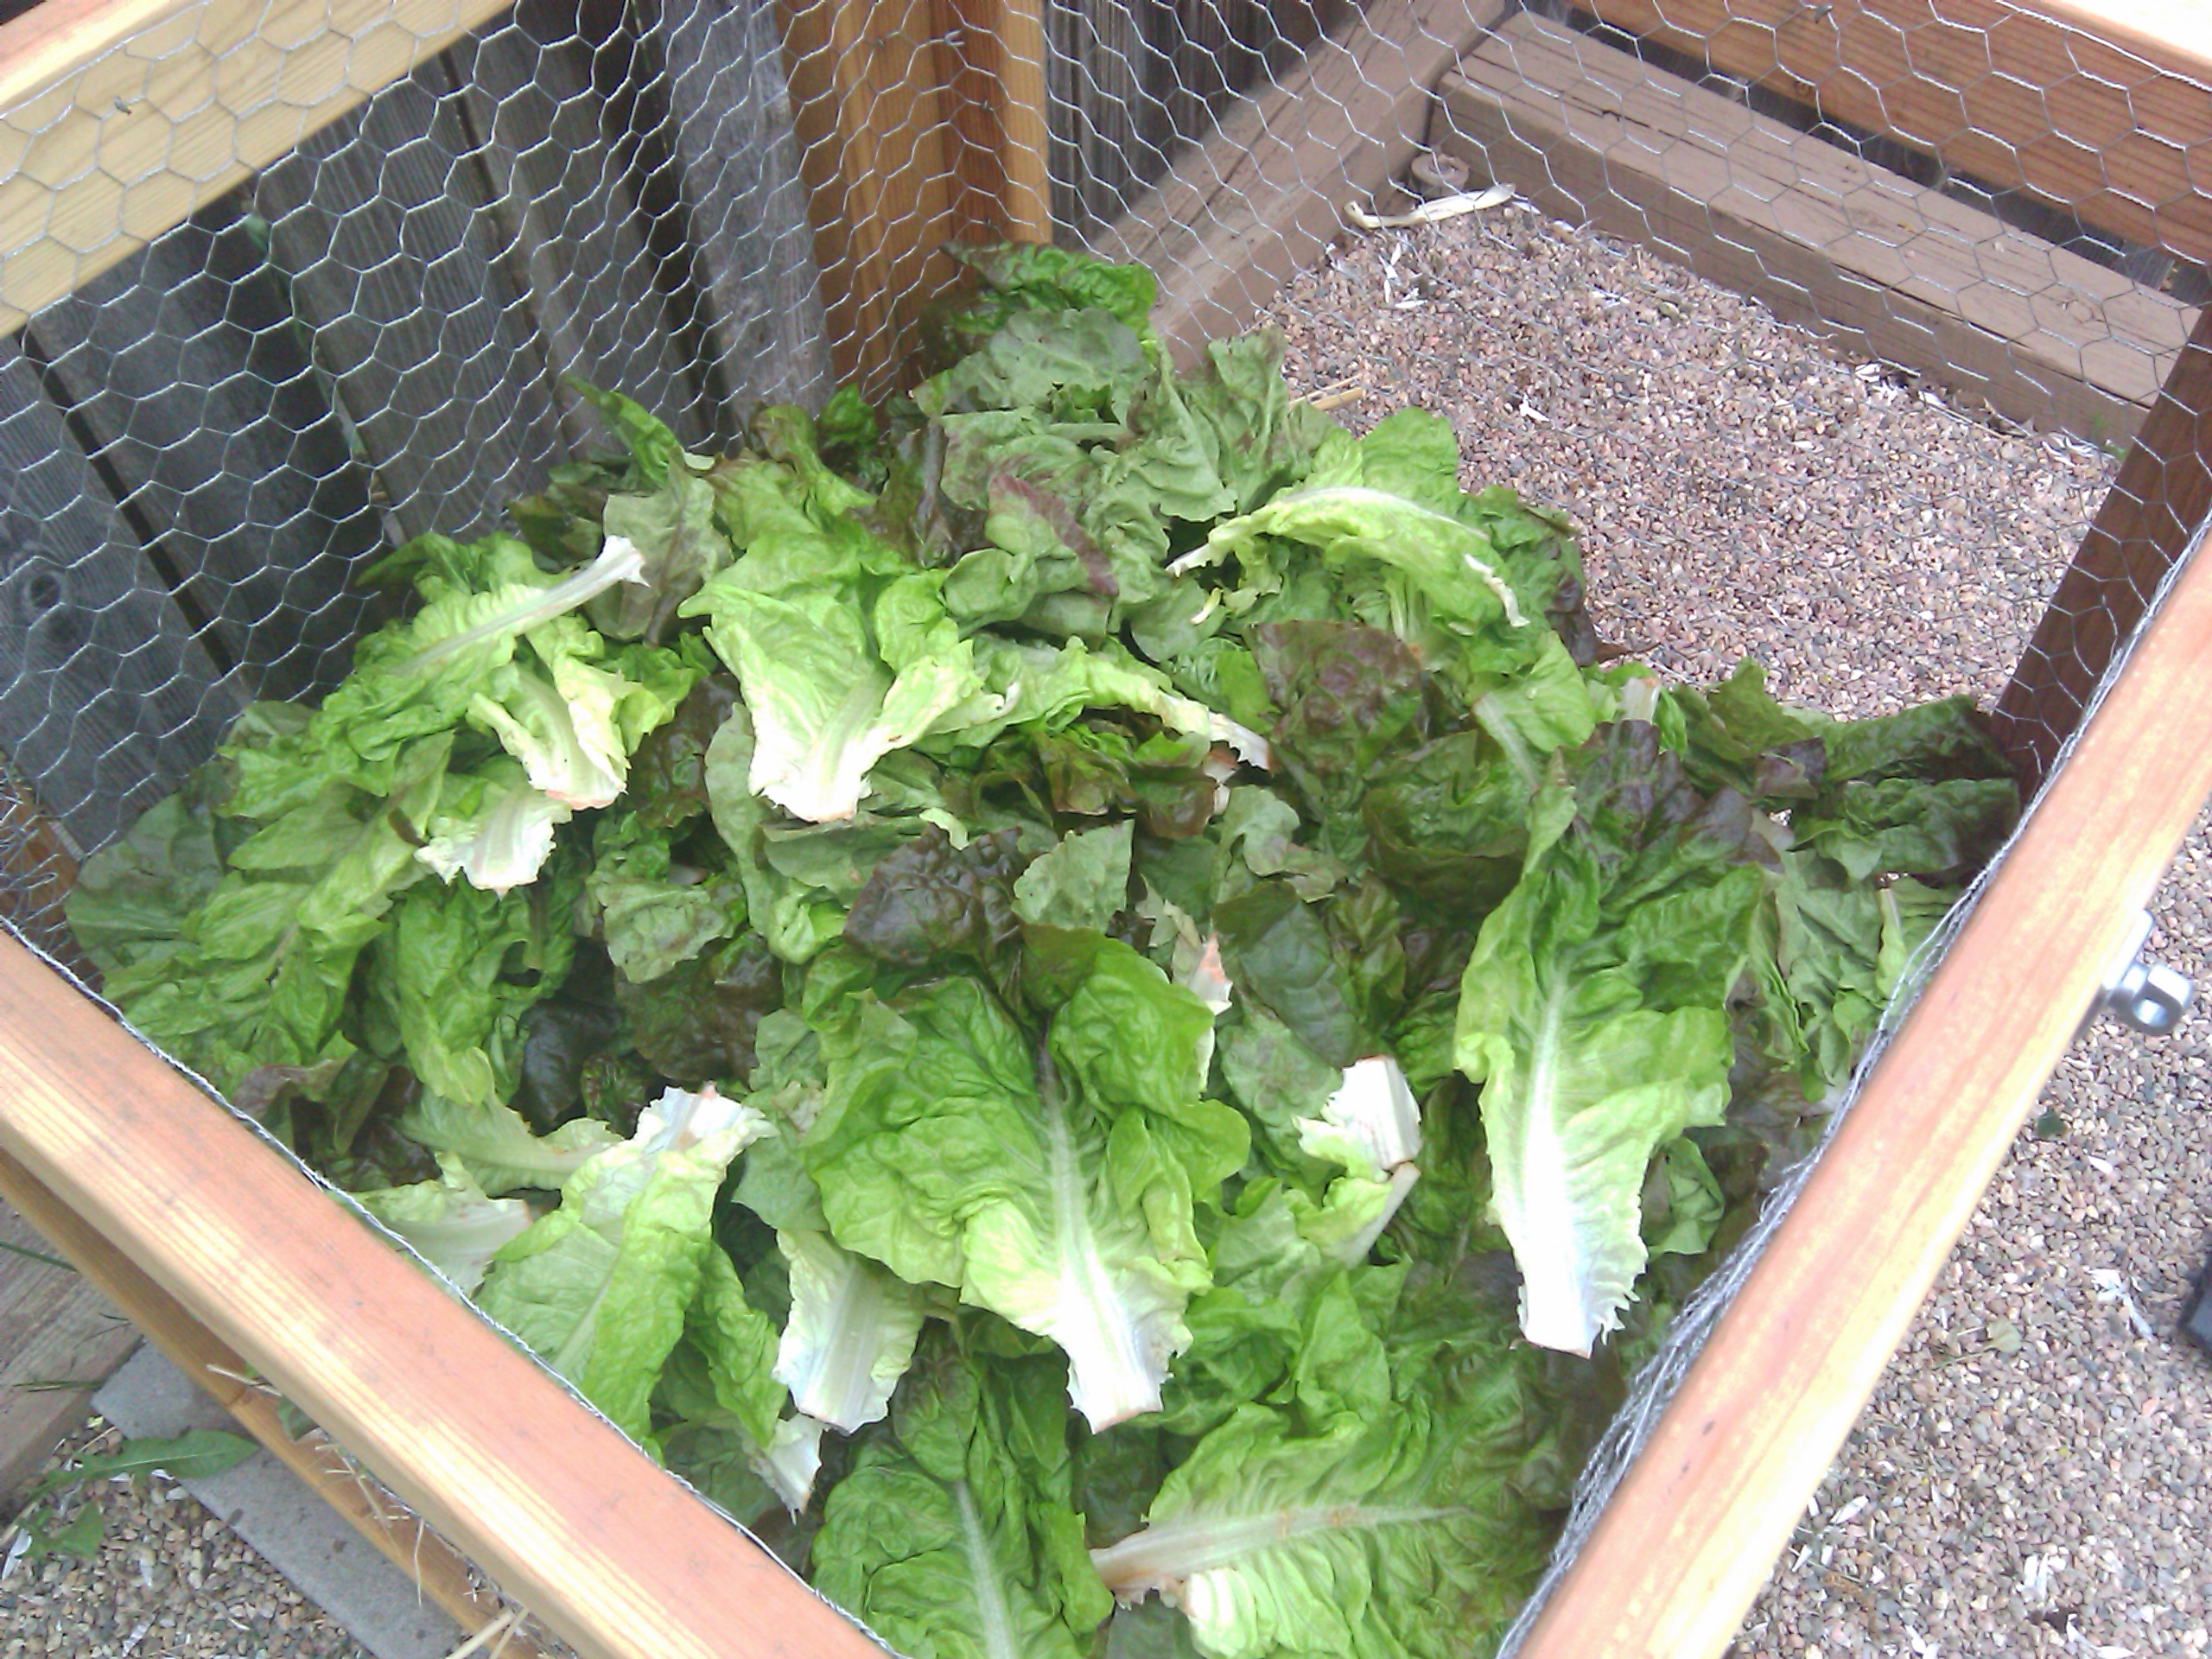 Lettuce waste from local market bound for compost or garbage